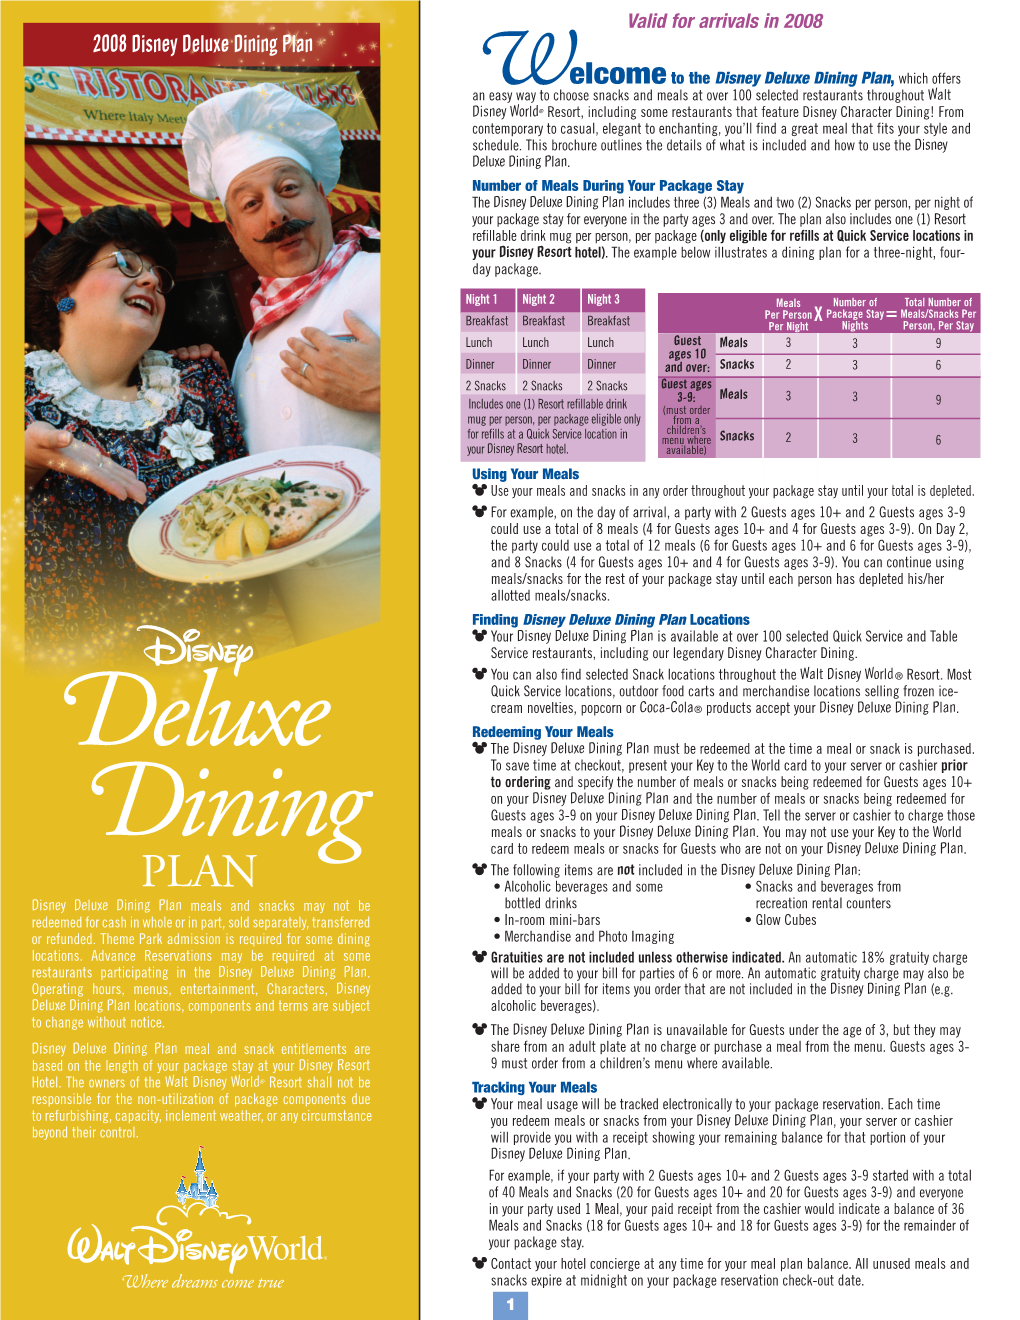 Deluxe Dining Plan